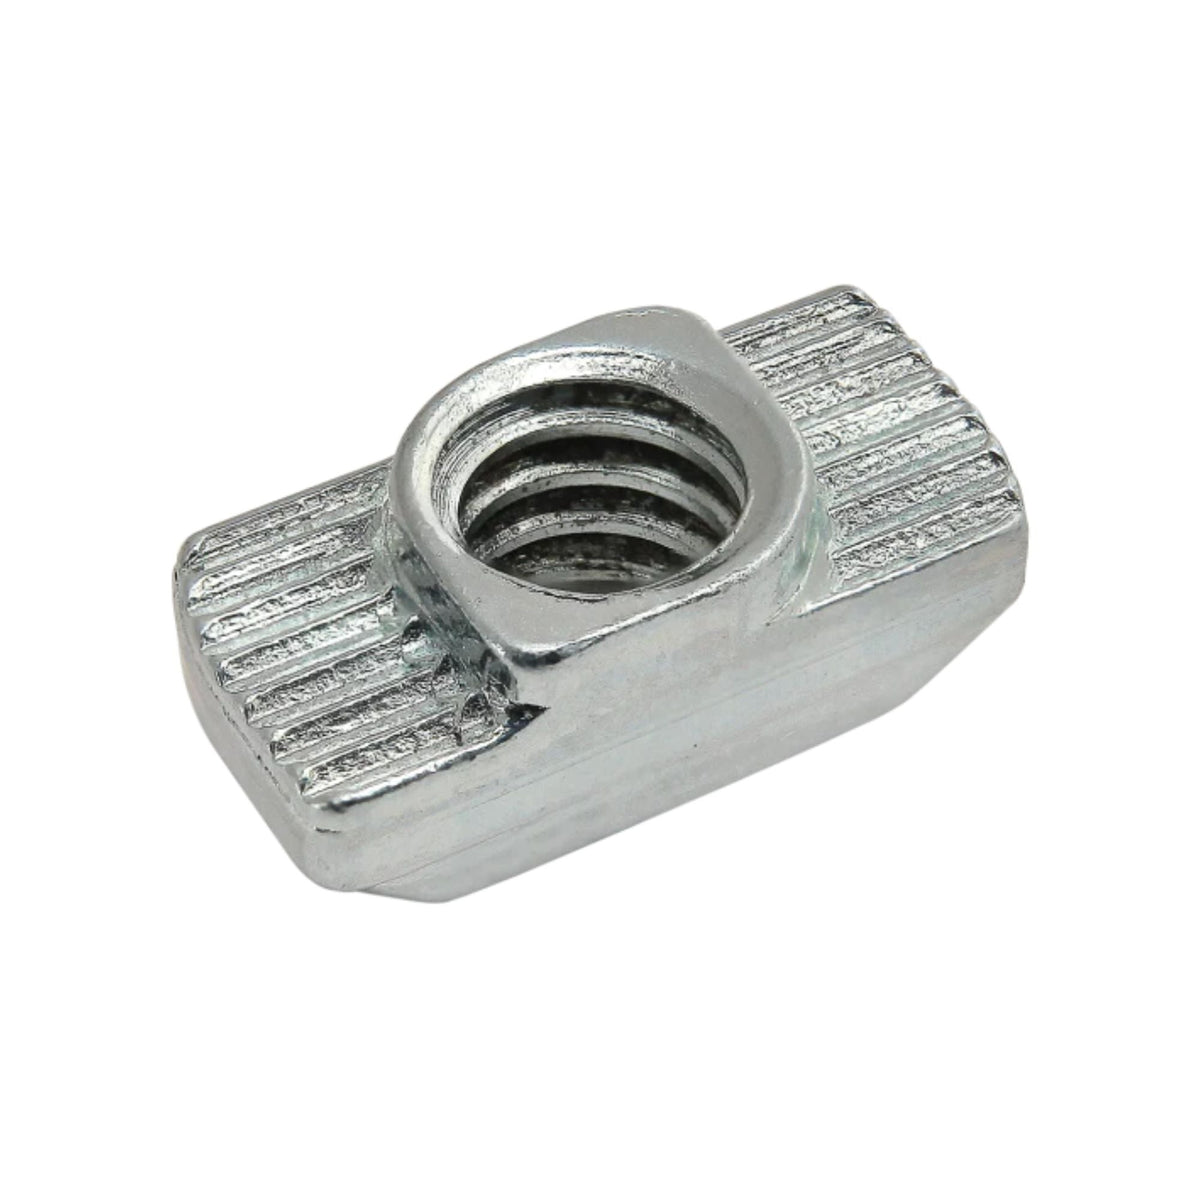 metal, rectangular t-nut with a rounded bottom and a threaded hole on the top